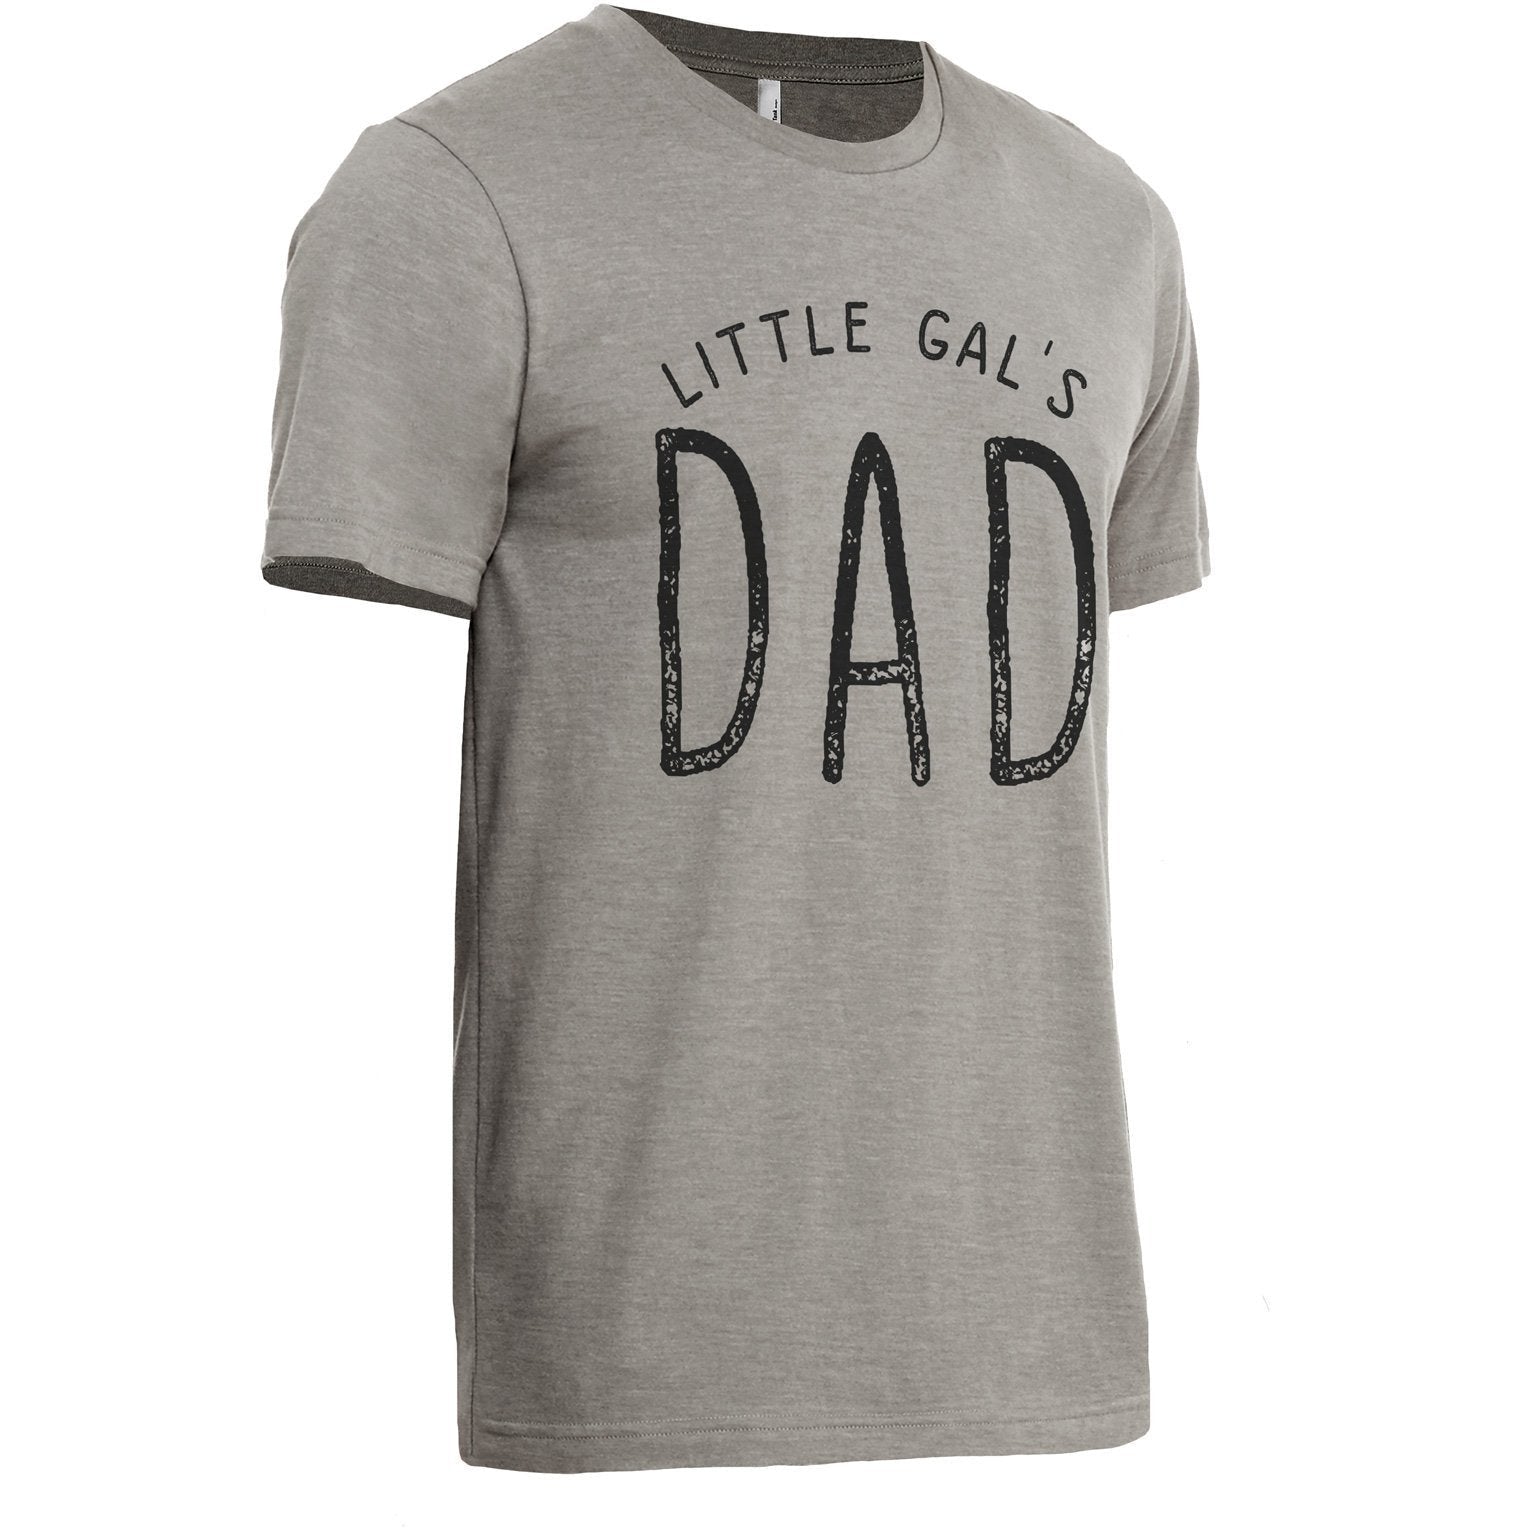 Lil Gal's Dad Military Grey Printed Graphic Men's Crew T-Shirt Tee Side View